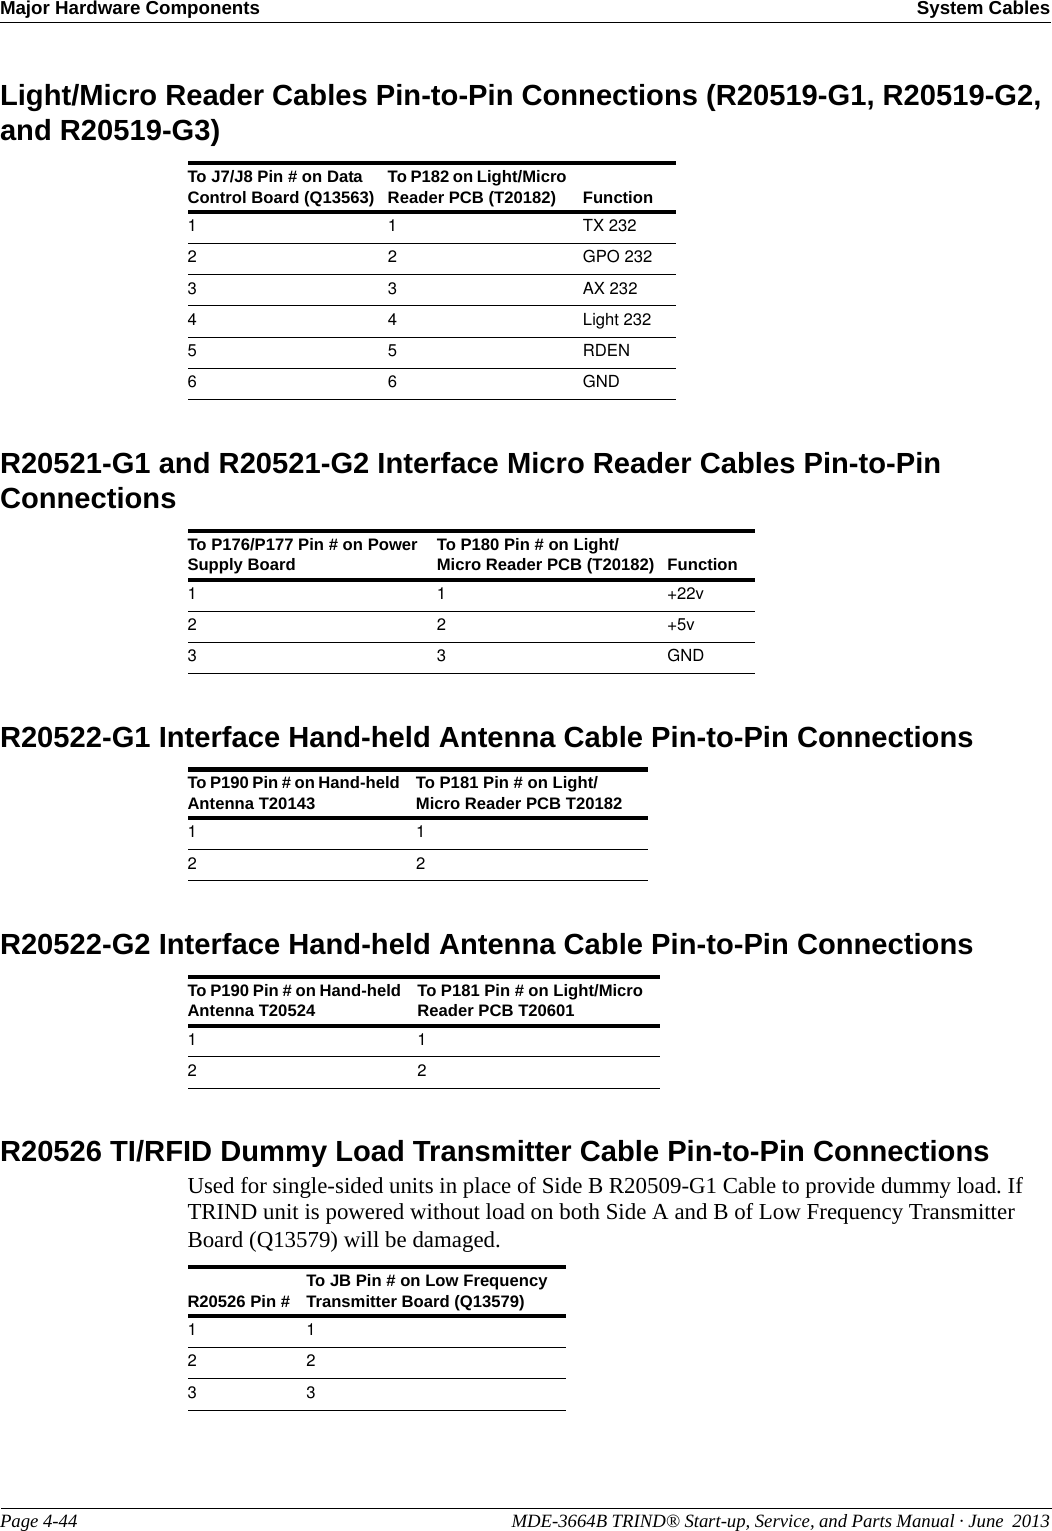 Major Hardware Components System CablesPage 4-44                                                                                                  MDE-3664B TRIND® Start-up, Service, and Parts Manual · June  2013Light/Micro Reader Cables Pin-to-Pin Connections (R20519-G1, R20519-G2, and R20519-G3)To J7/J8 Pin # on Data Control Board (Q13563) To P182 on Light/Micro Reader PCB (T20182) Function1 1 TX 2322 2 GPO 2323 3 AX 2324 4 Light 2325 5 RDEN6 6 GNDR20521-G1 and R20521-G2 Interface Micro Reader Cables Pin-to-Pin ConnectionsTo P176/P177 Pin # on Power Supply Board  To P180 Pin # on Light/Micro Reader PCB (T20182) Function1 1 +22v2 2 +5v3 3 GNDR20522-G1 Interface Hand-held Antenna Cable Pin-to-Pin ConnectionsTo P190 Pin # on Hand-held Antenna T20143  To P181 Pin # on Light/Micro Reader PCB T201821 12 2R20522-G2 Interface Hand-held Antenna Cable Pin-to-Pin ConnectionsTo P190 Pin # on Hand-held Antenna T20524  To P181 Pin # on Light/Micro Reader PCB T206011 12 2R20526 TI/RFID Dummy Load Transmitter Cable Pin-to-Pin ConnectionsUsed for single-sided units in place of Side B R20509-G1 Cable to provide dummy load. If TRIND unit is powered without load on both Side A and B of Low Frequency Transmitter Board (Q13579) will be damaged.R20526 Pin # To JB Pin # on Low Frequency Transmitter Board (Q13579)1 12 23 3